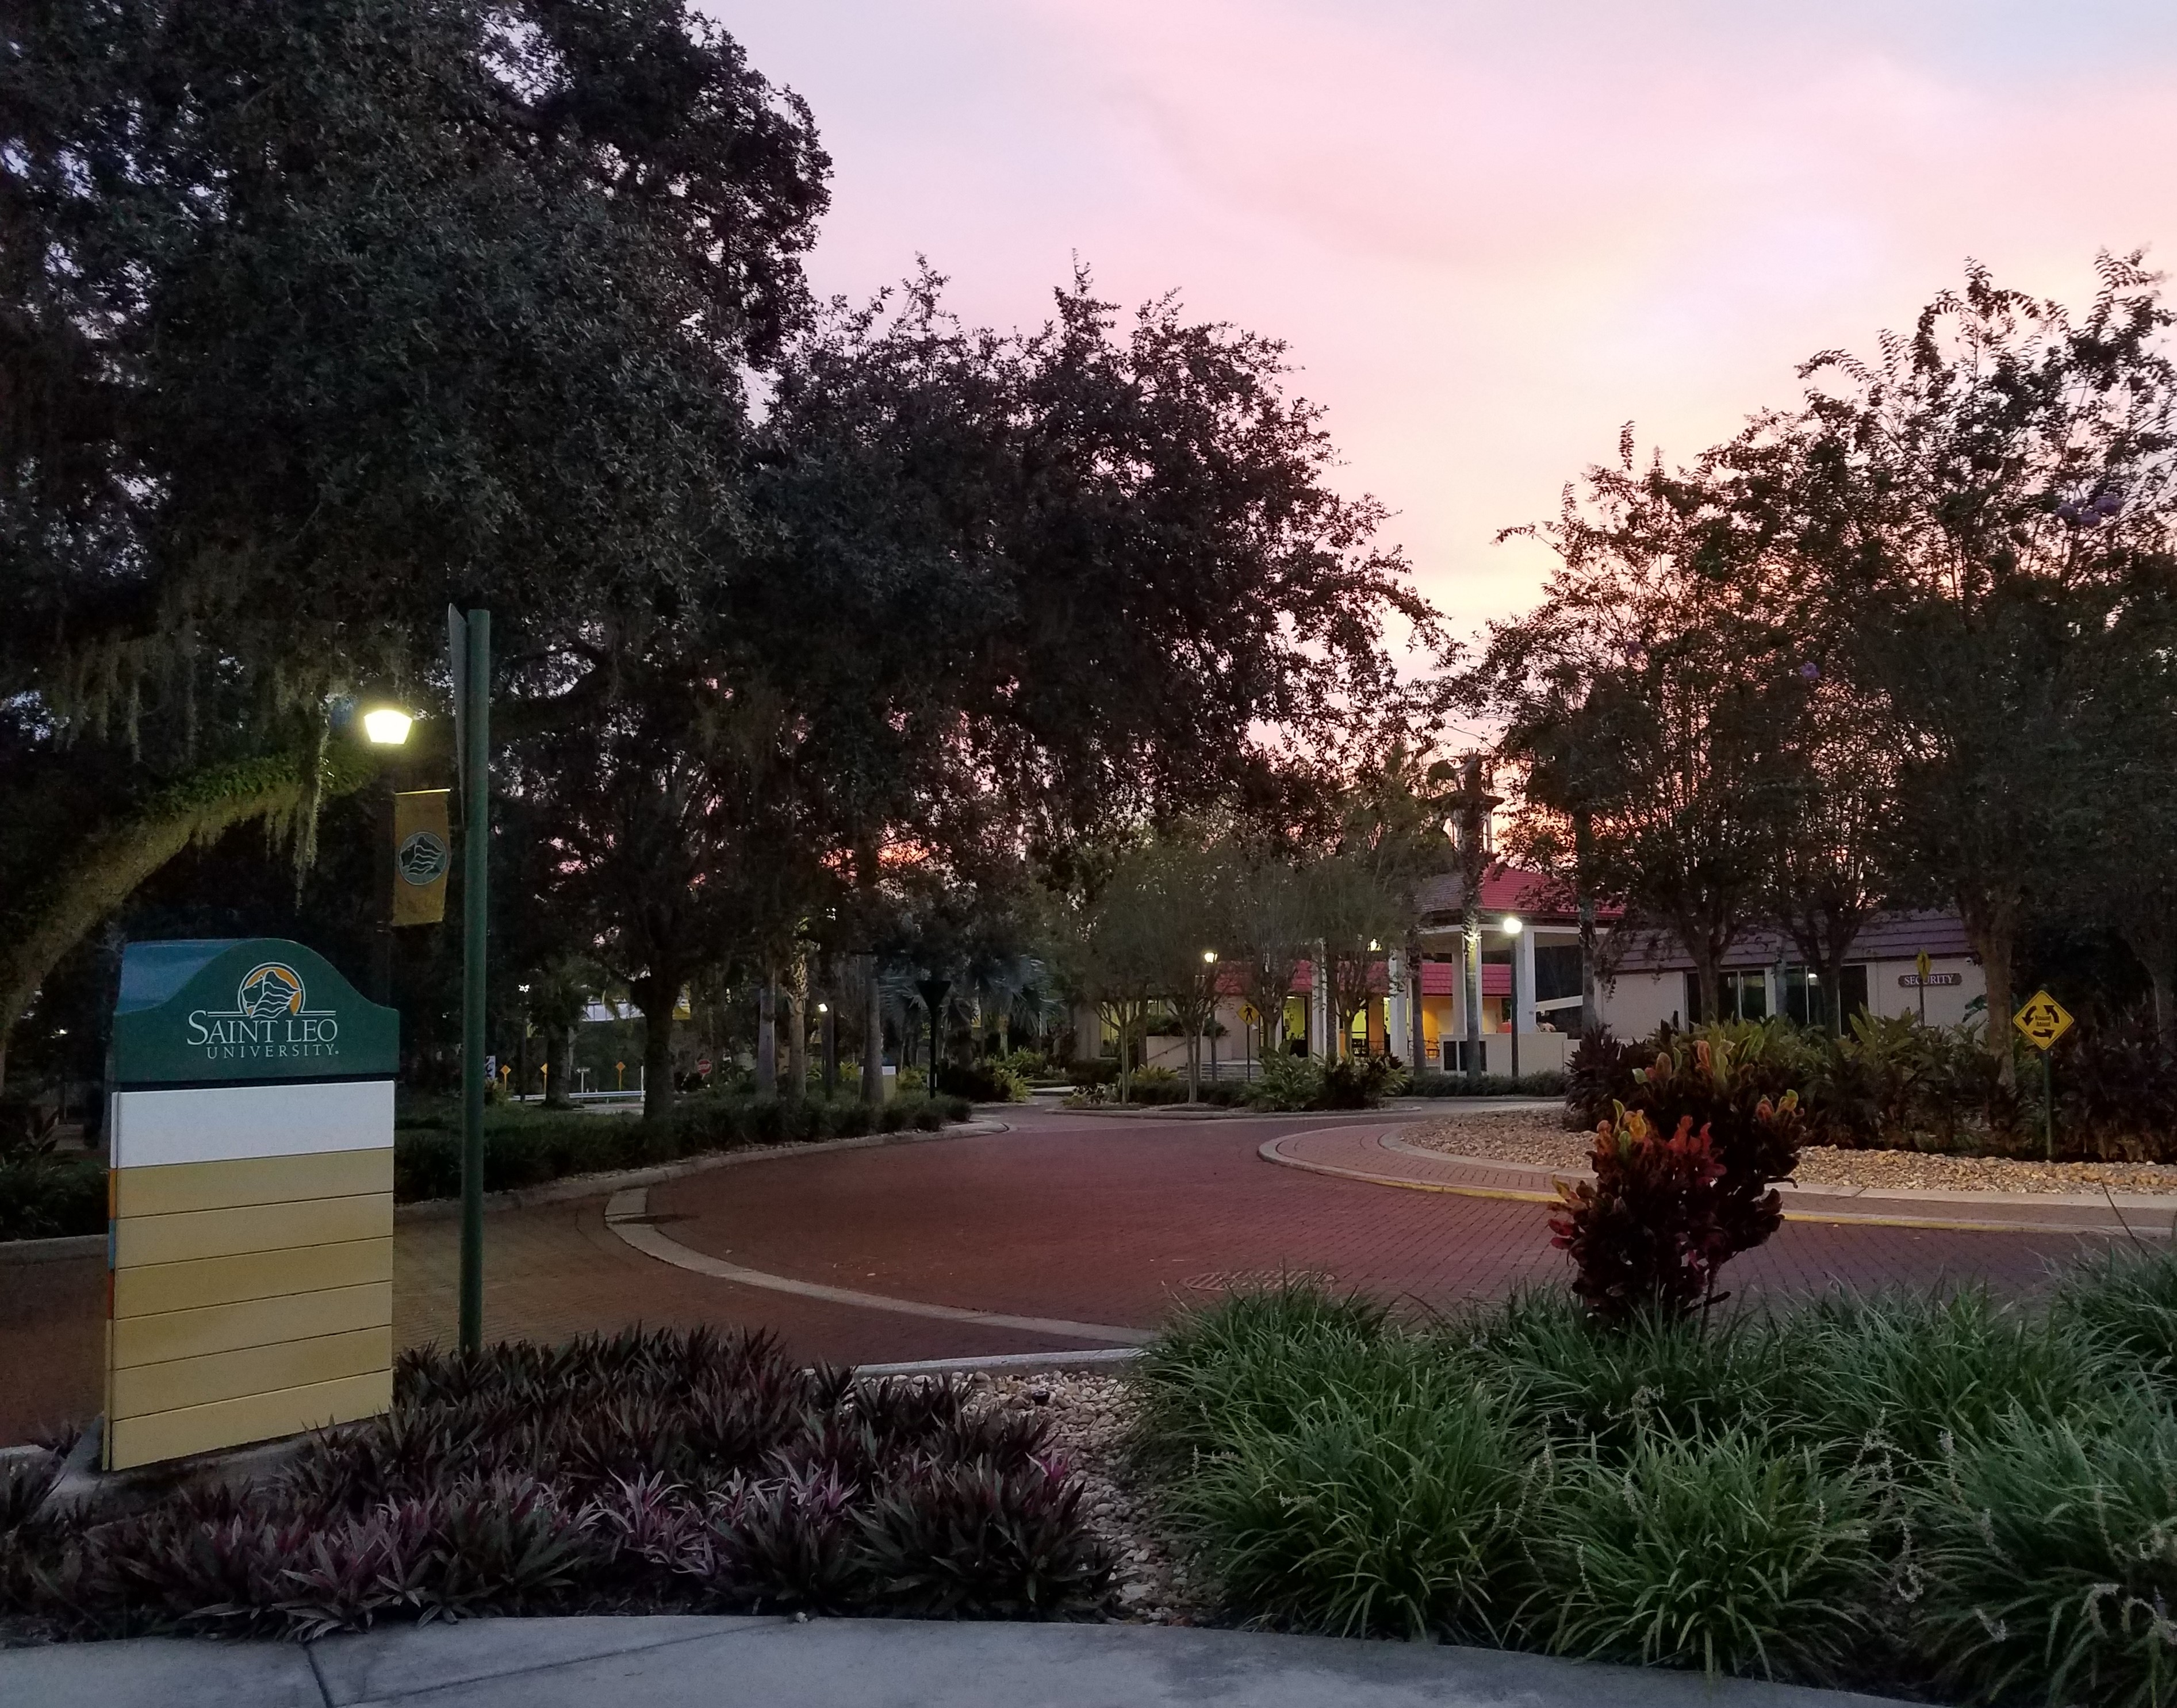 Saint Leo's roundabout at the front of the university's entrance.